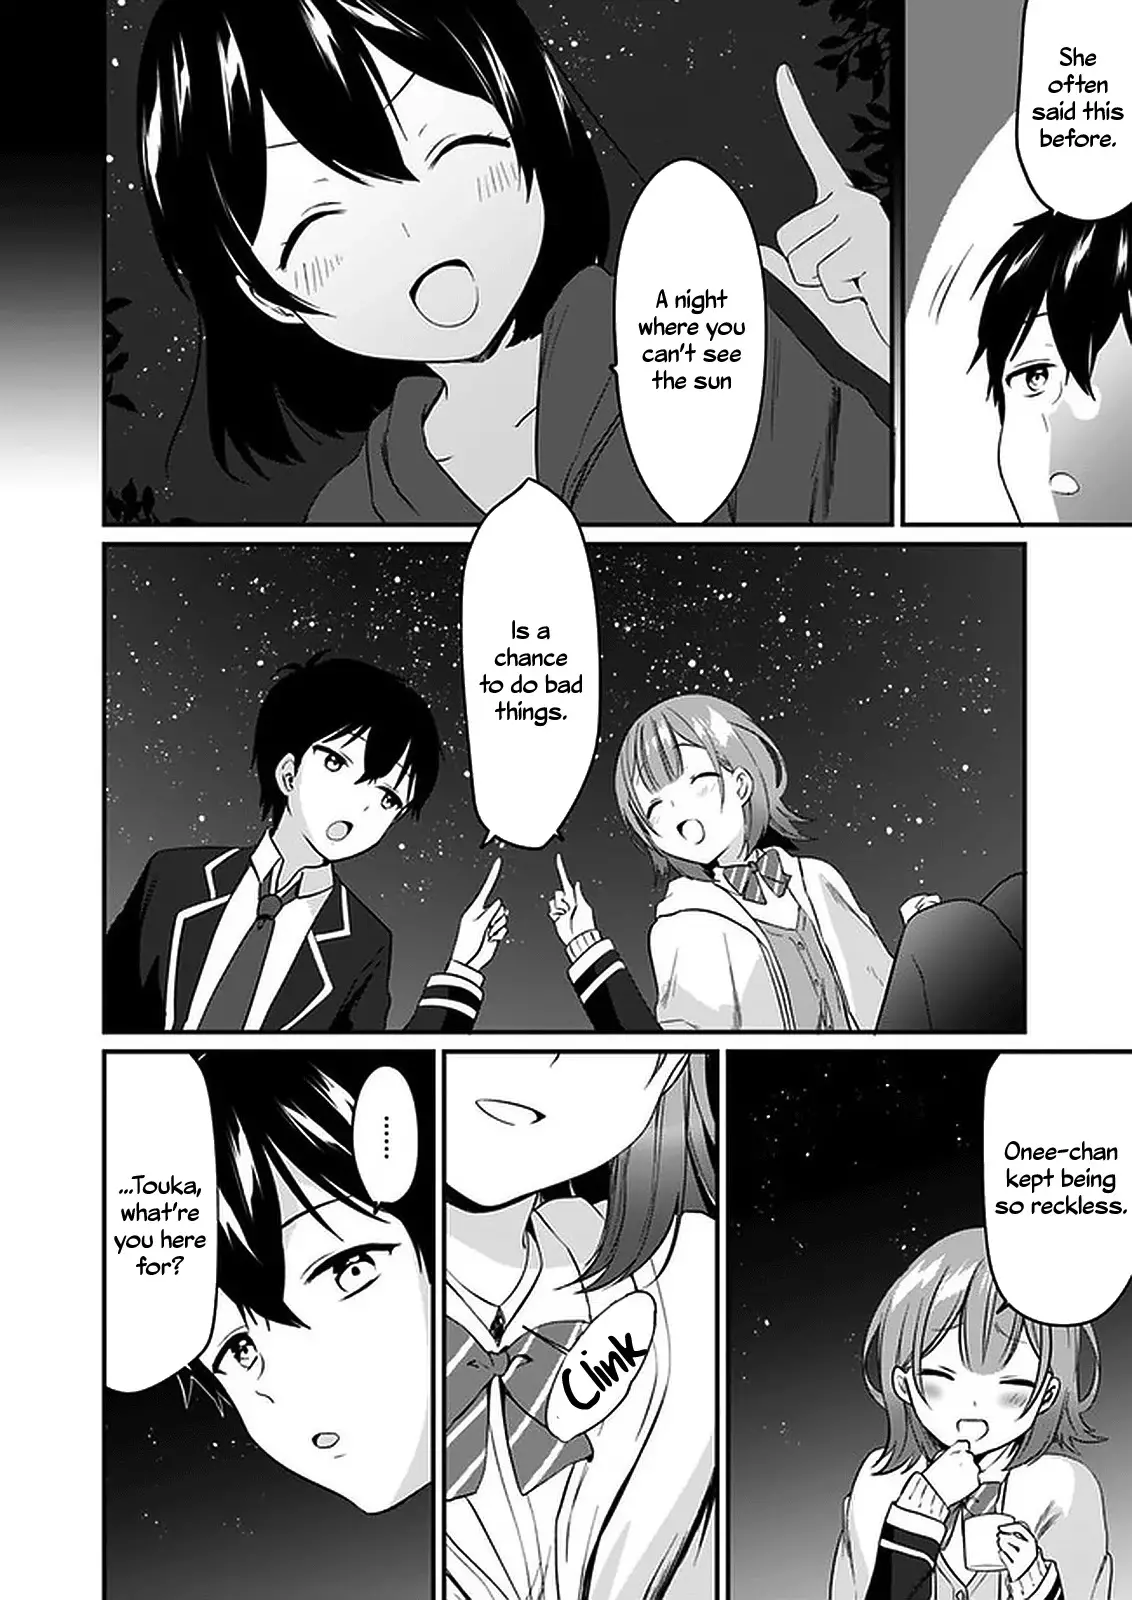 Right Now, She's Still My Childhood Friend's Sister. - 1 page 20